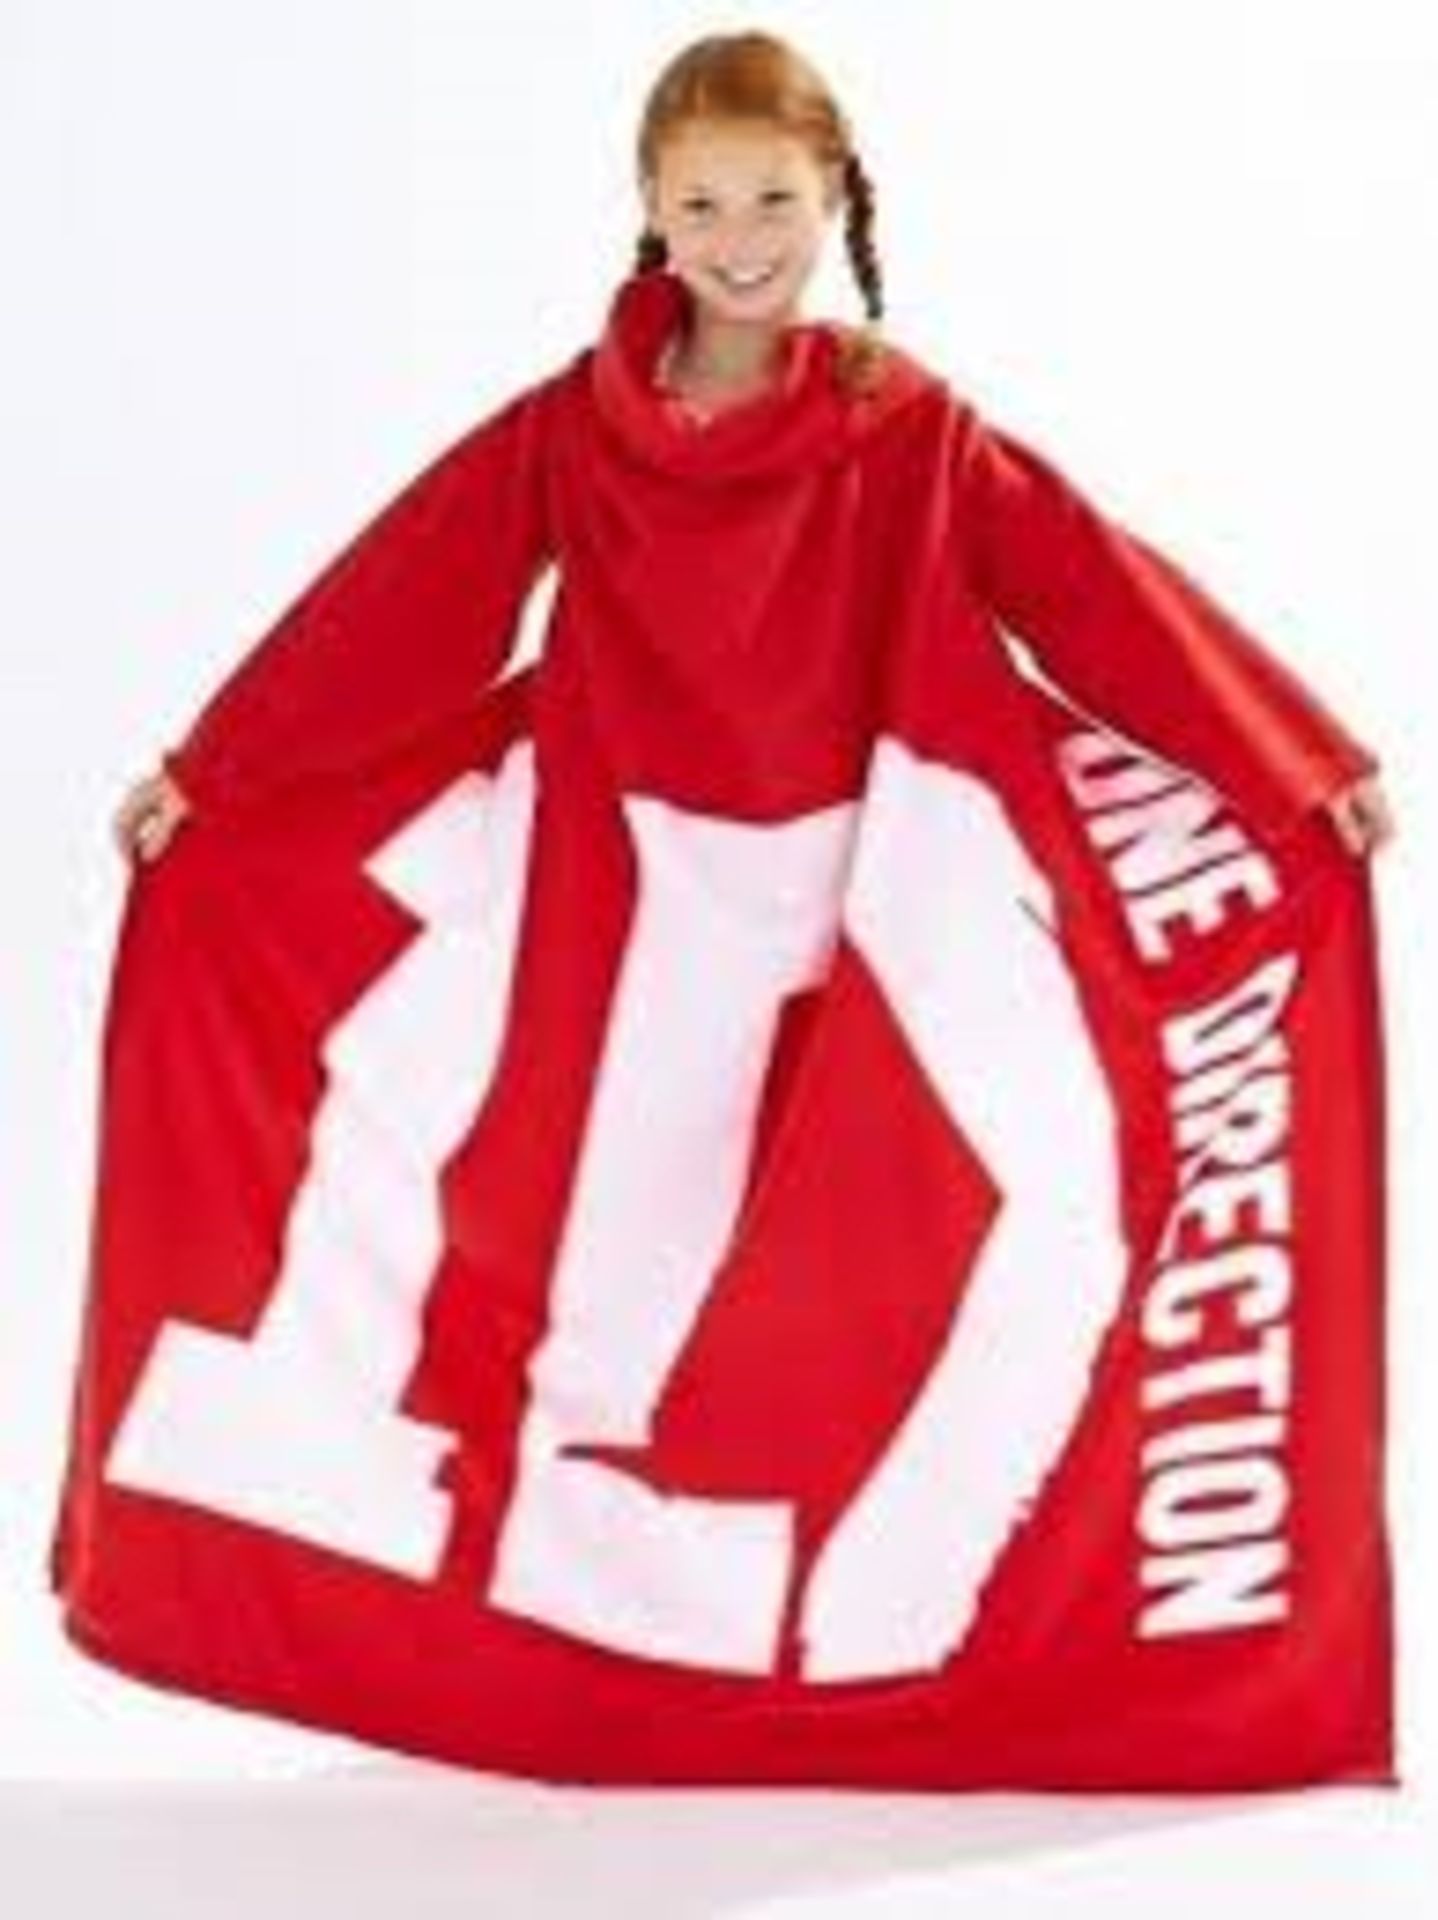 2 x One Direction Sleeved Fleece. 'Relax in comfort' 120cm x 140cm. High retail value. Brand new and